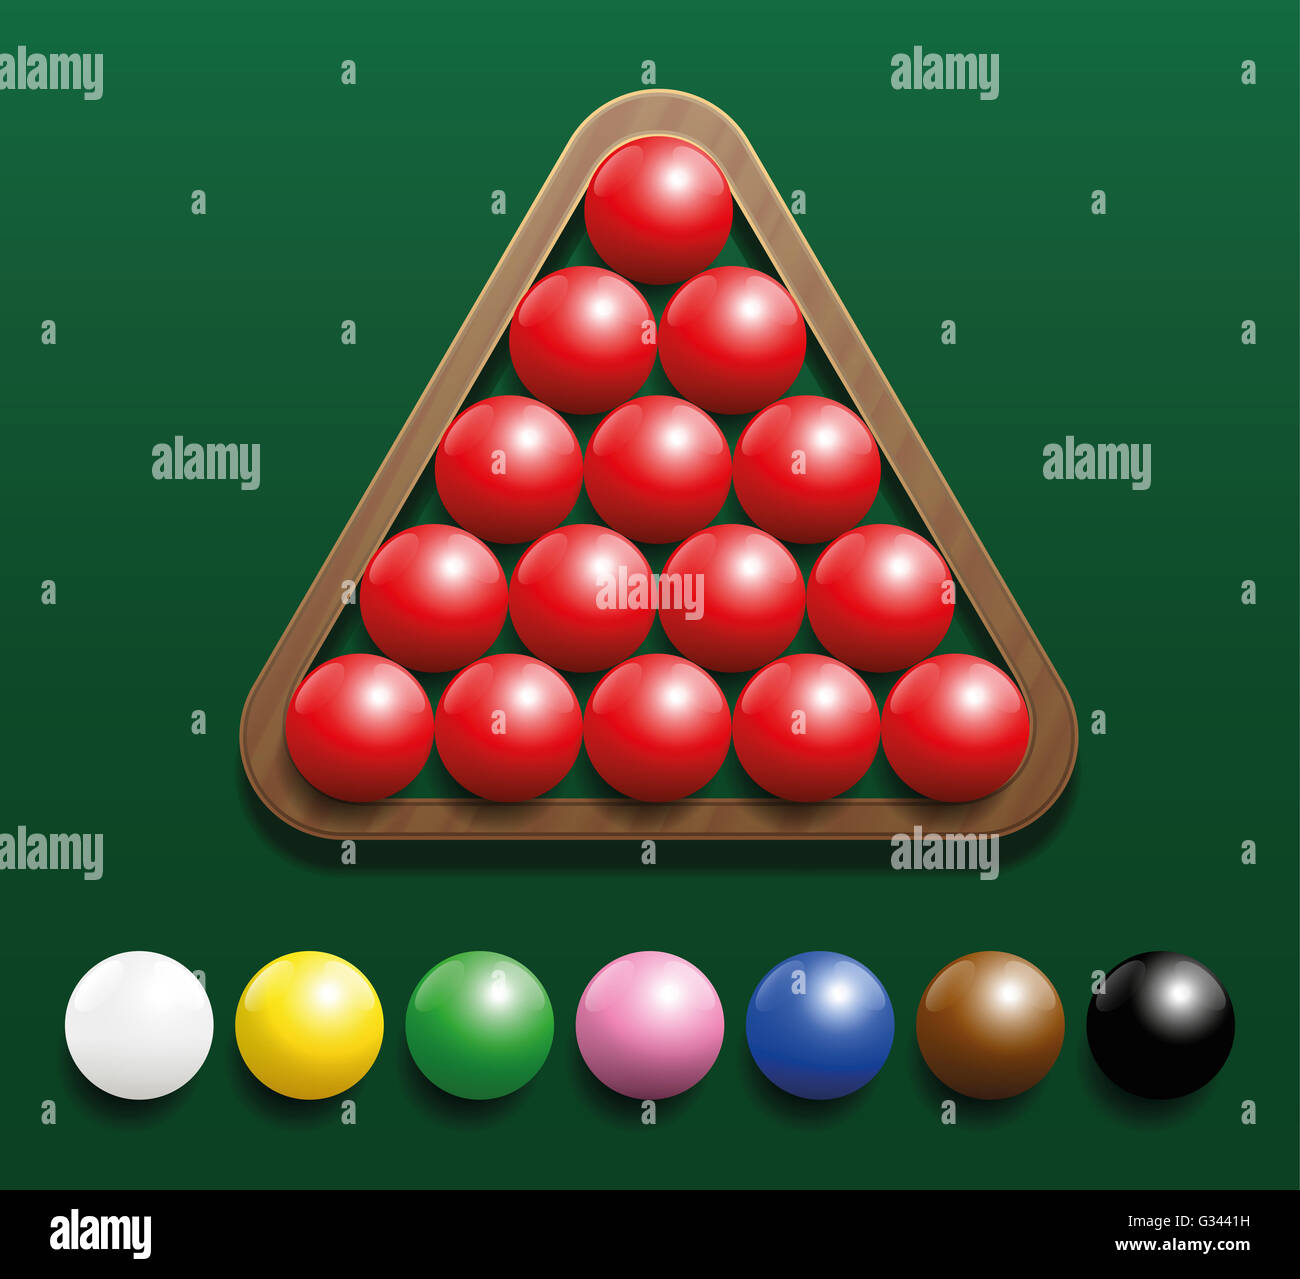 Snooker set with fifteen red balls in a wooden rack and seven colored balls in a row. Three-dimensional illustration. Stock Photo